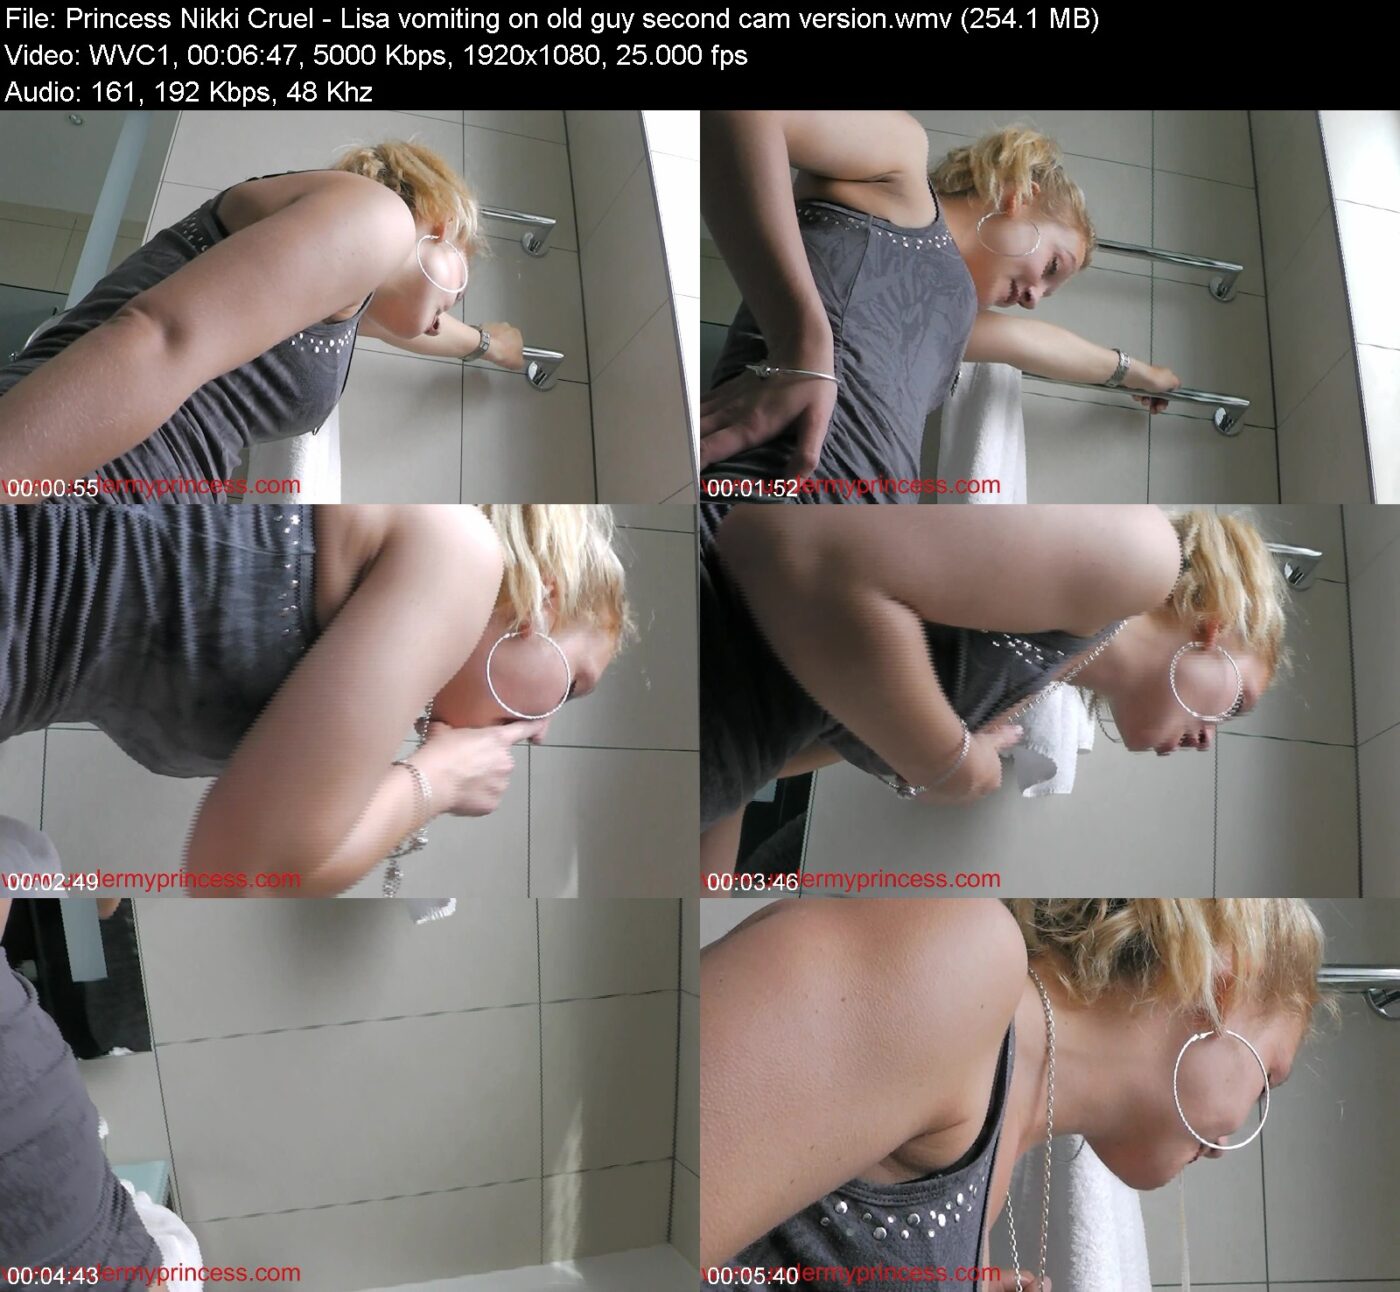 Actress: Princess Nikki Cruel. Title and Studio: Lisa vomiting on old guy second cam version